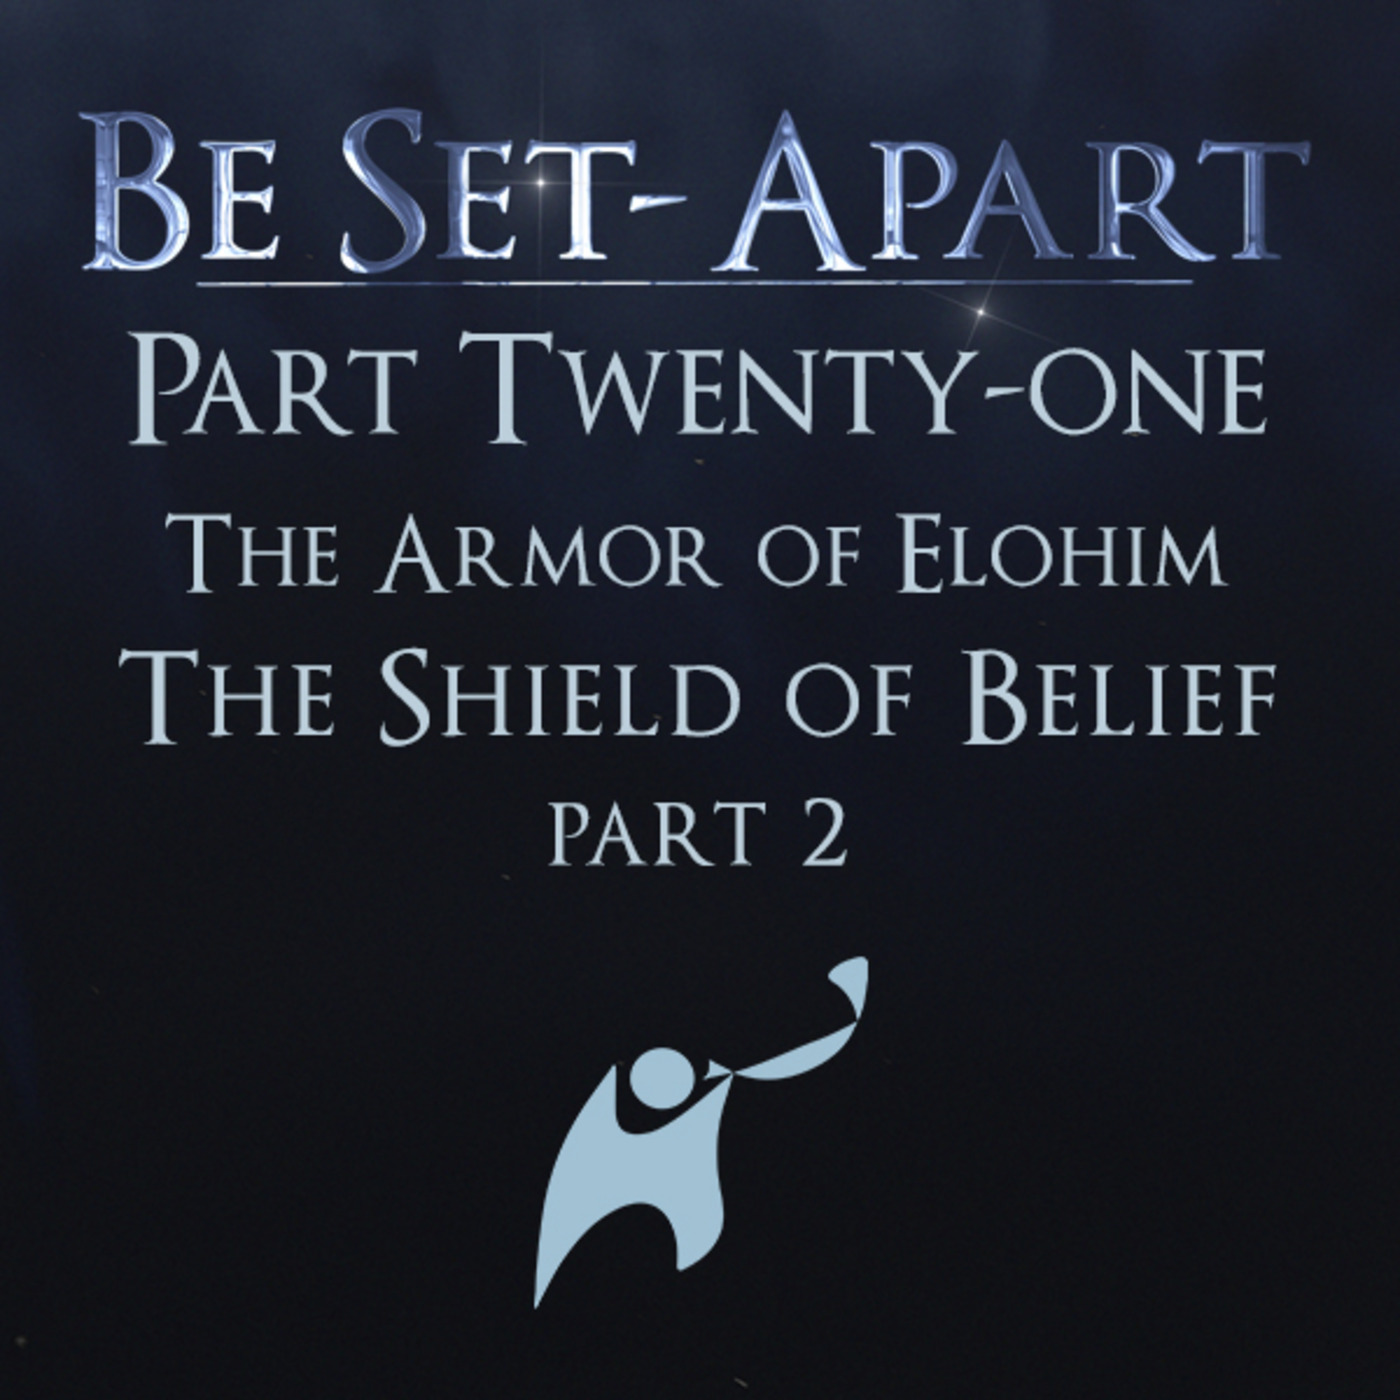 Episode 815: Be Set-Apart | Part Twenty-one | The Armor of Elohim | The Shield of Belief | Part 2